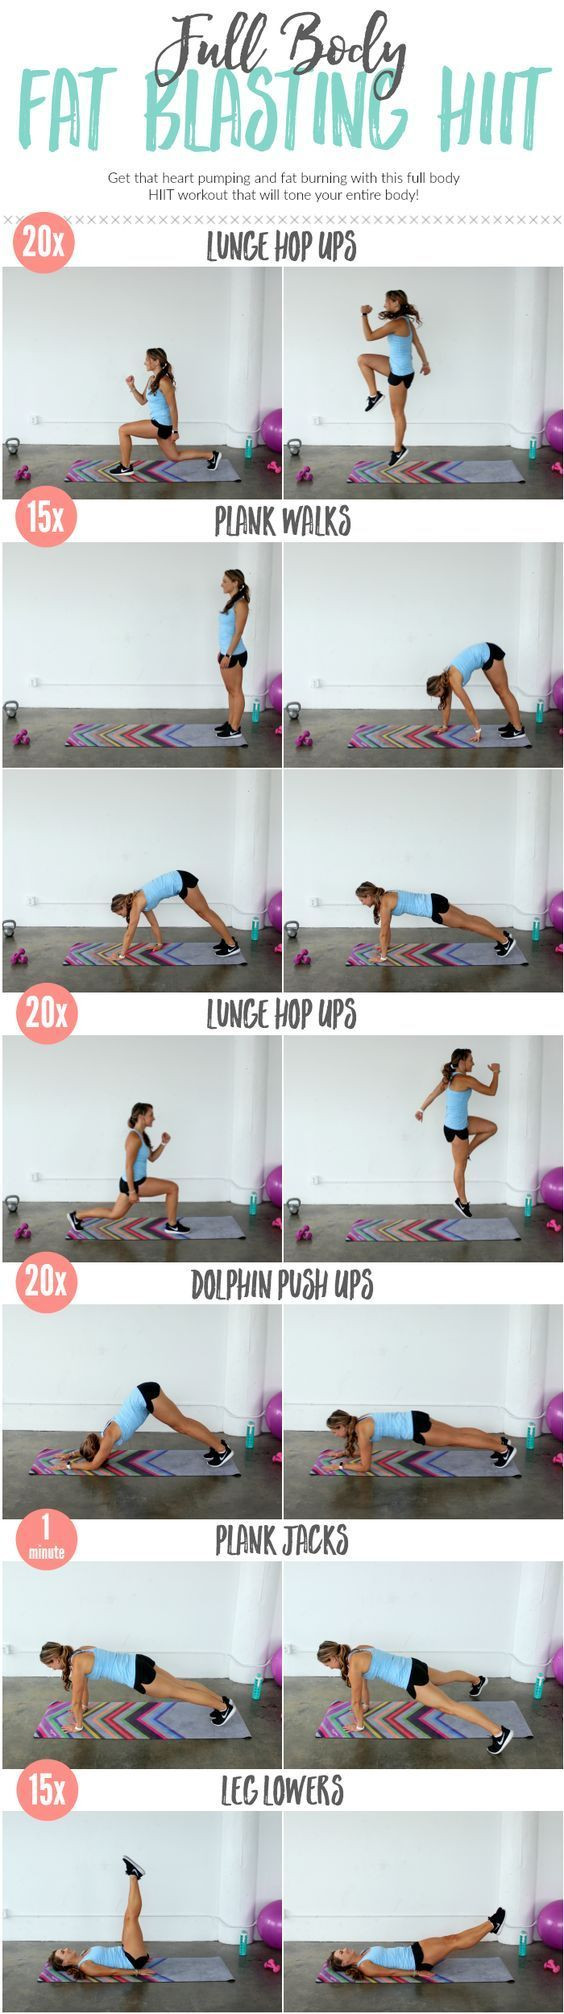 Hiit Fat Burning Workouts
 51 Fat Burning Workouts That Fit Into ANY Busy Schedule